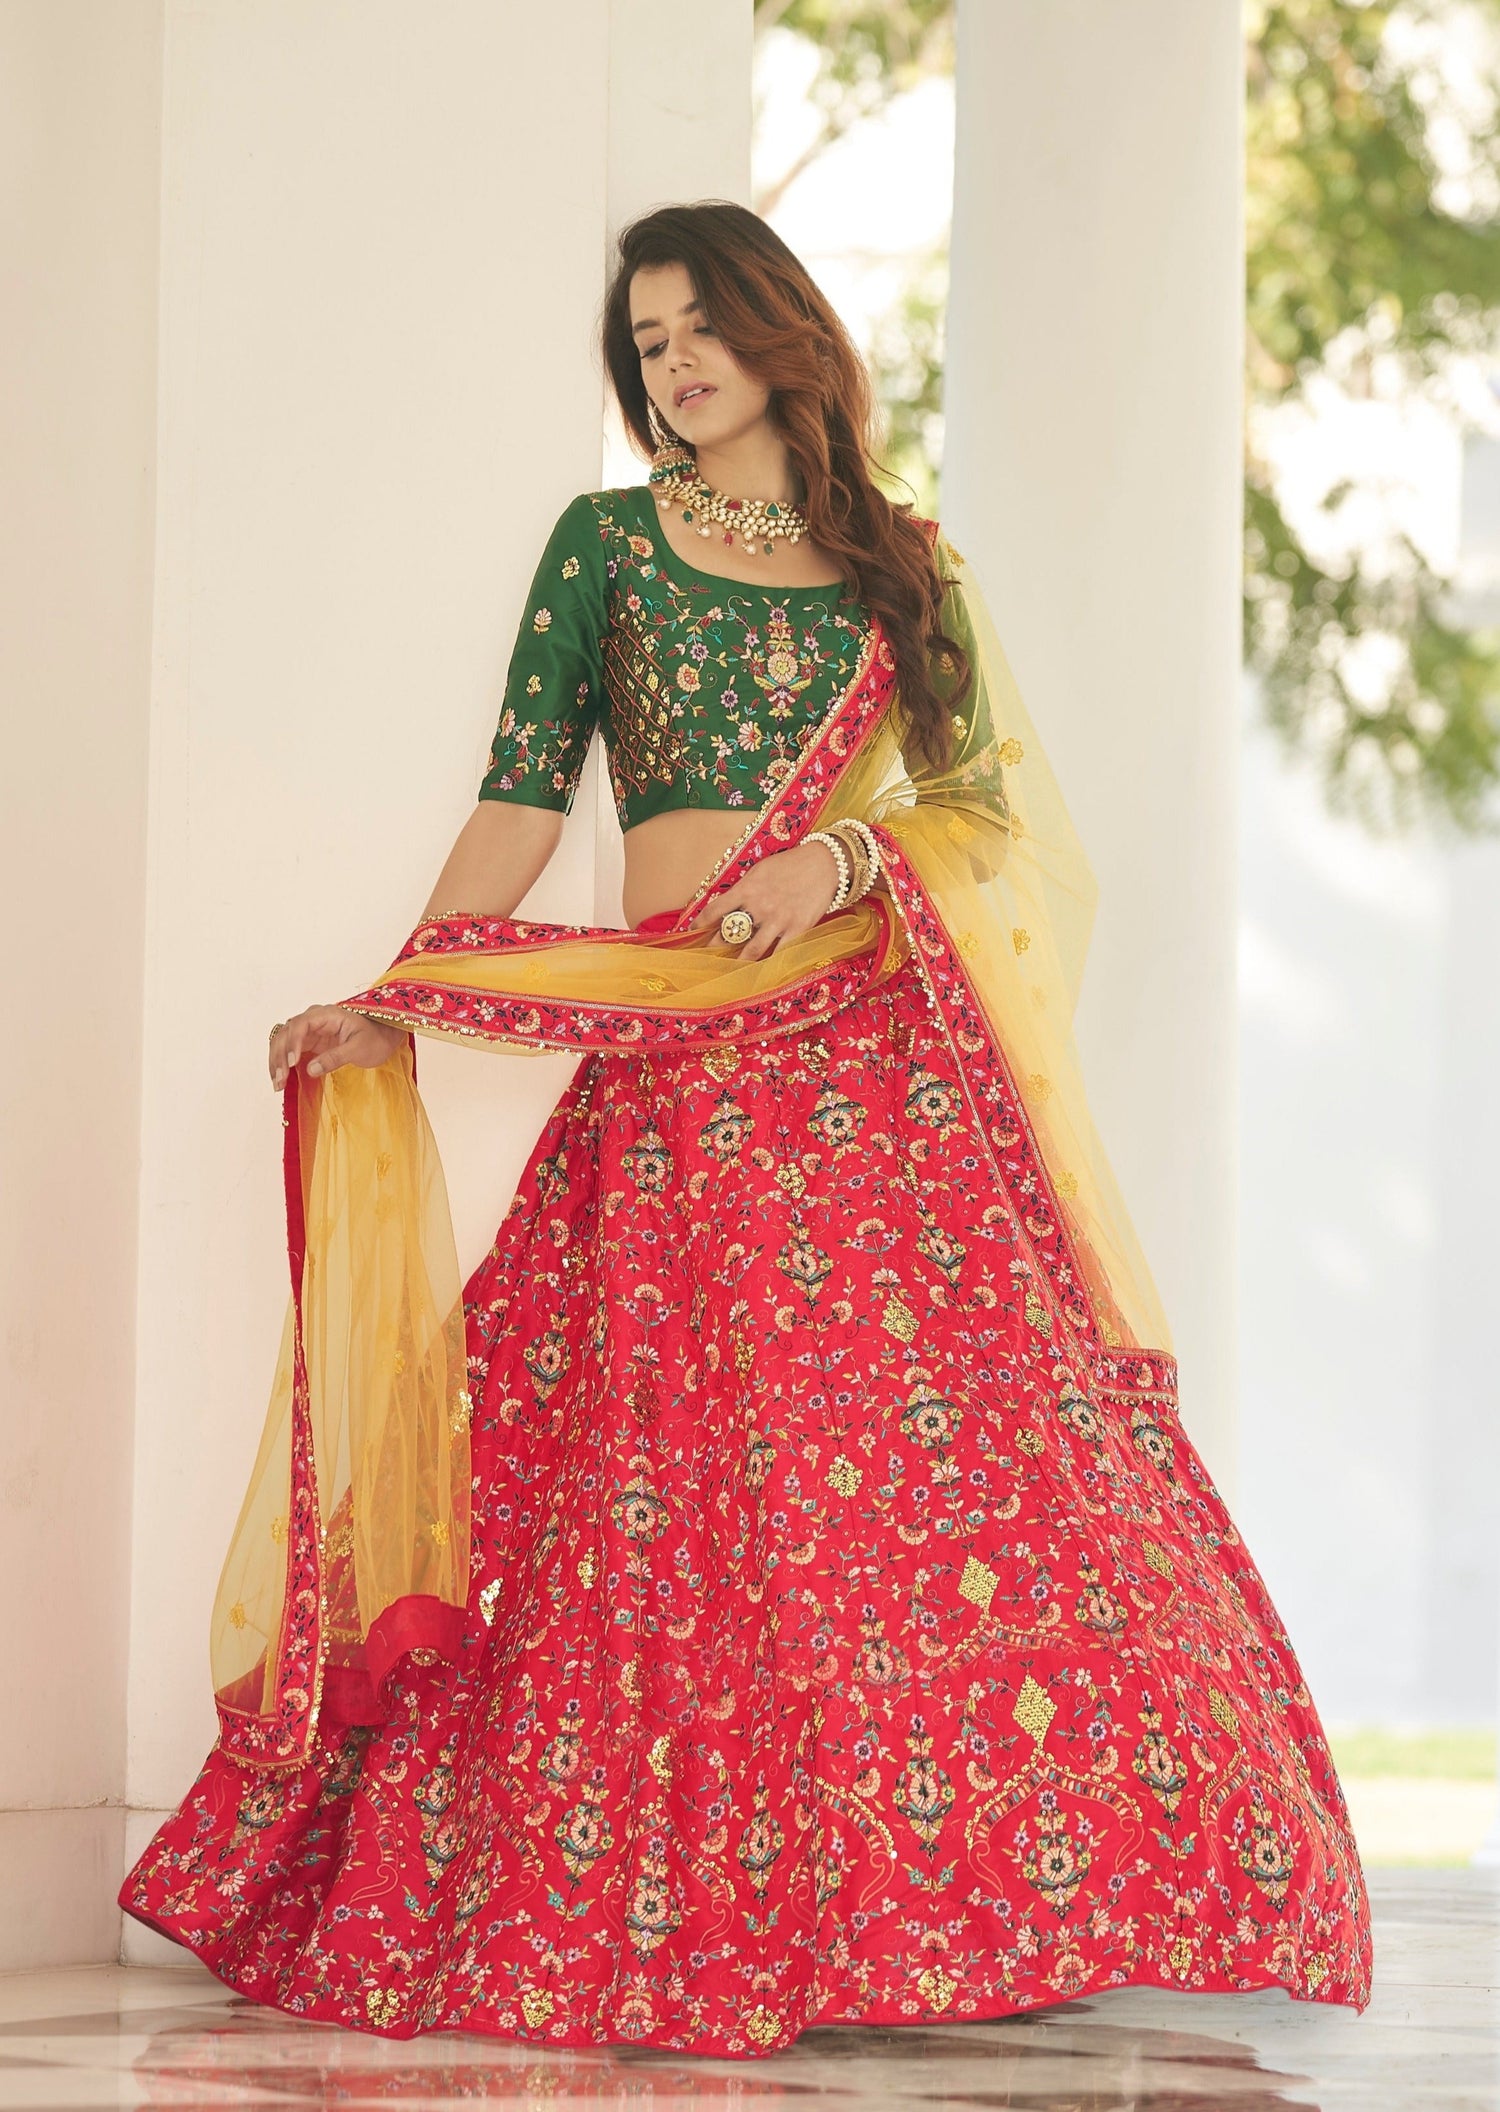 Red lehanga with green blouse | Saree blouse designs, Lehnga designs,  Indian designer outfits